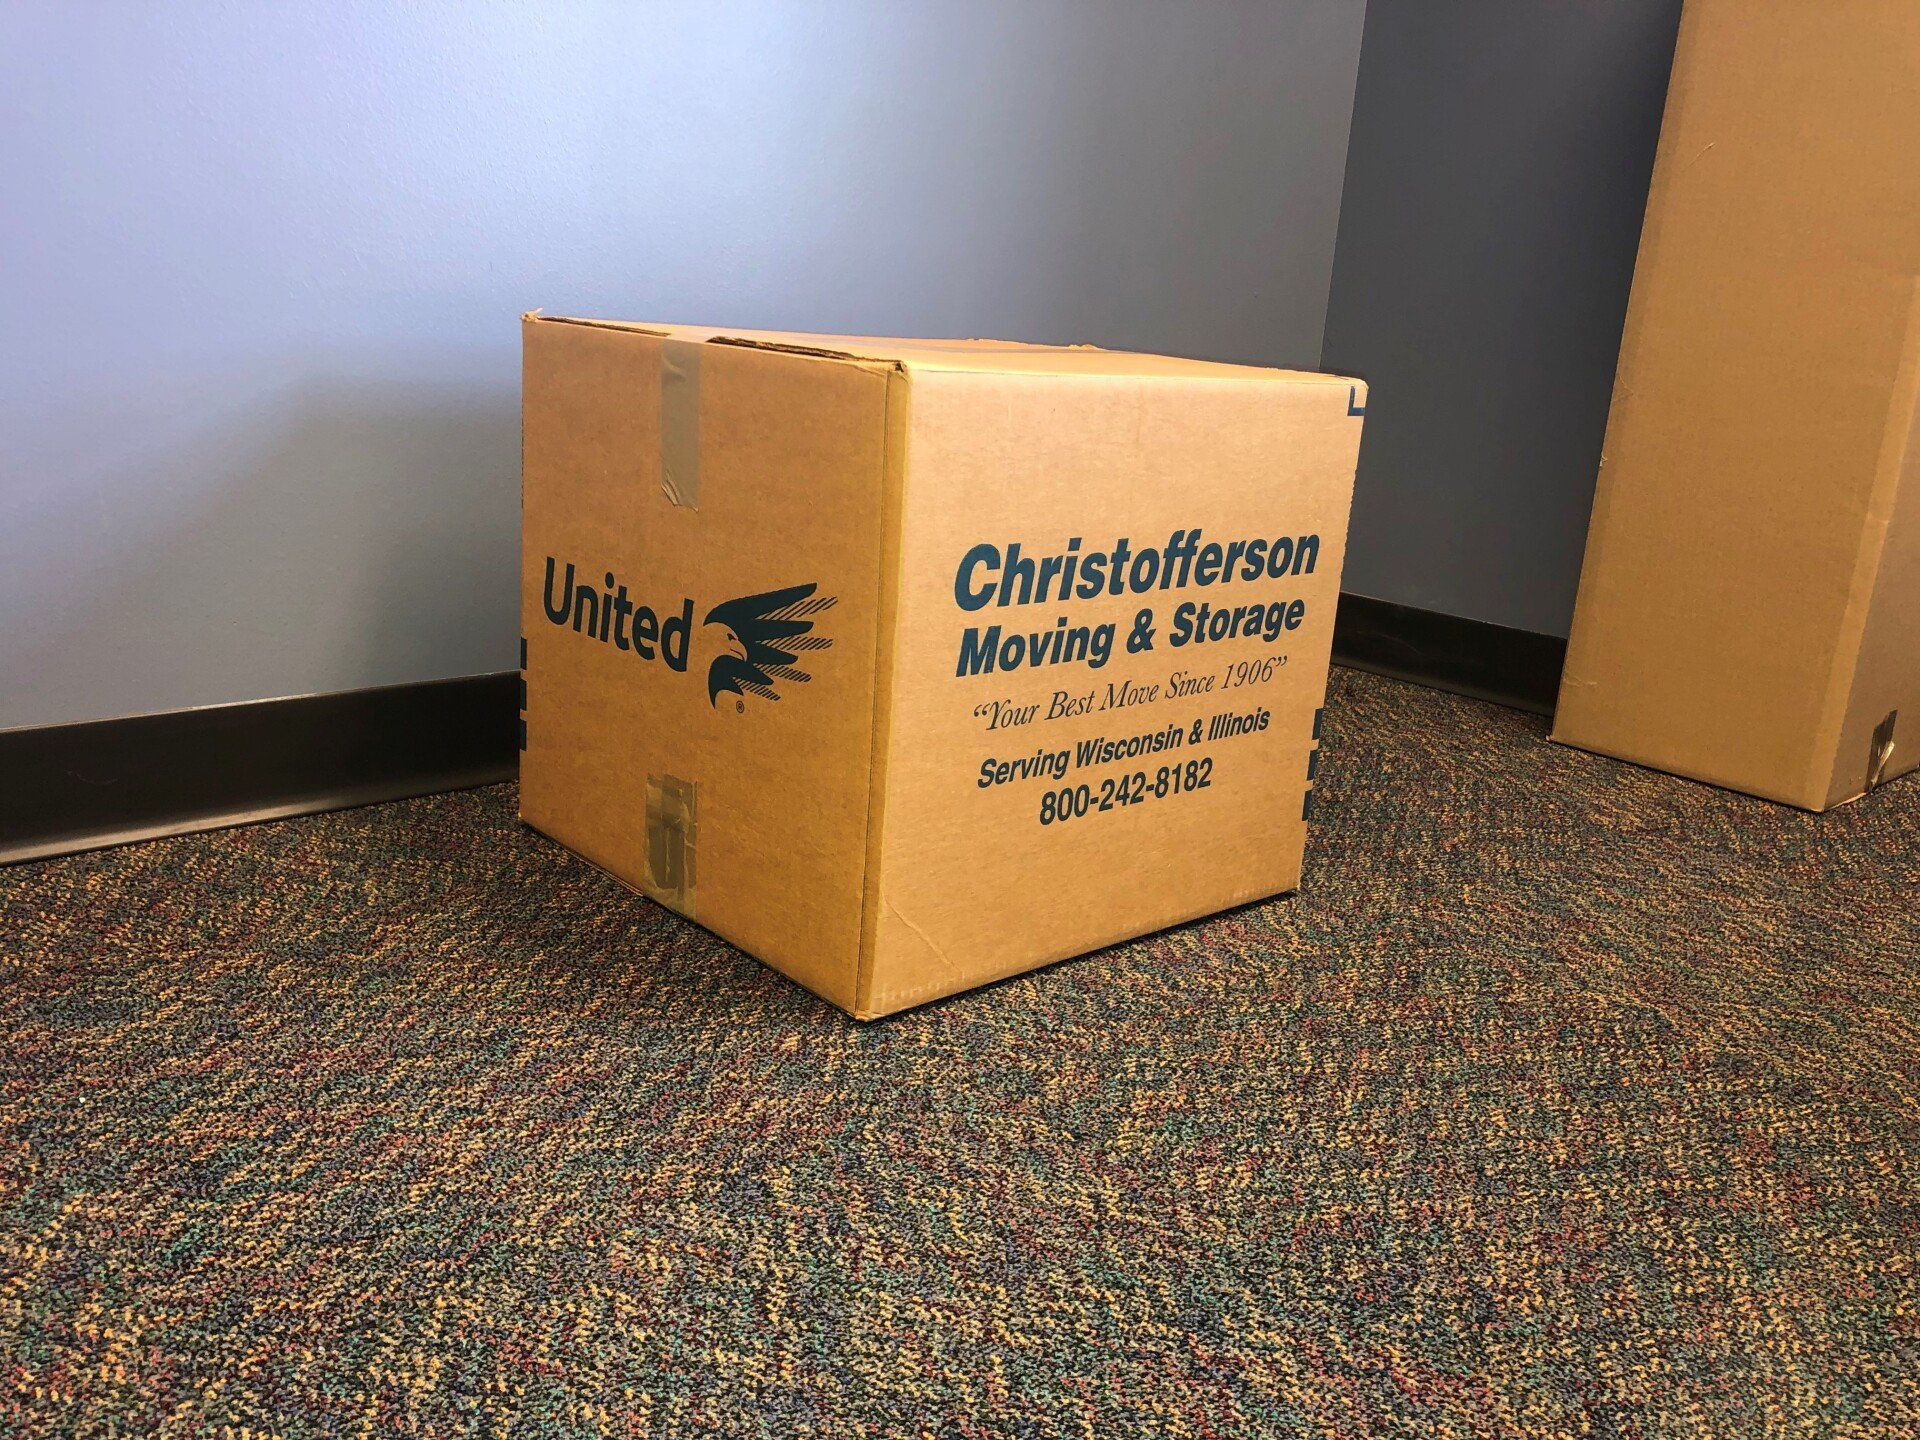 Moving Delivery Man — Court Beloit, WI — Christofferson Moving & Storage